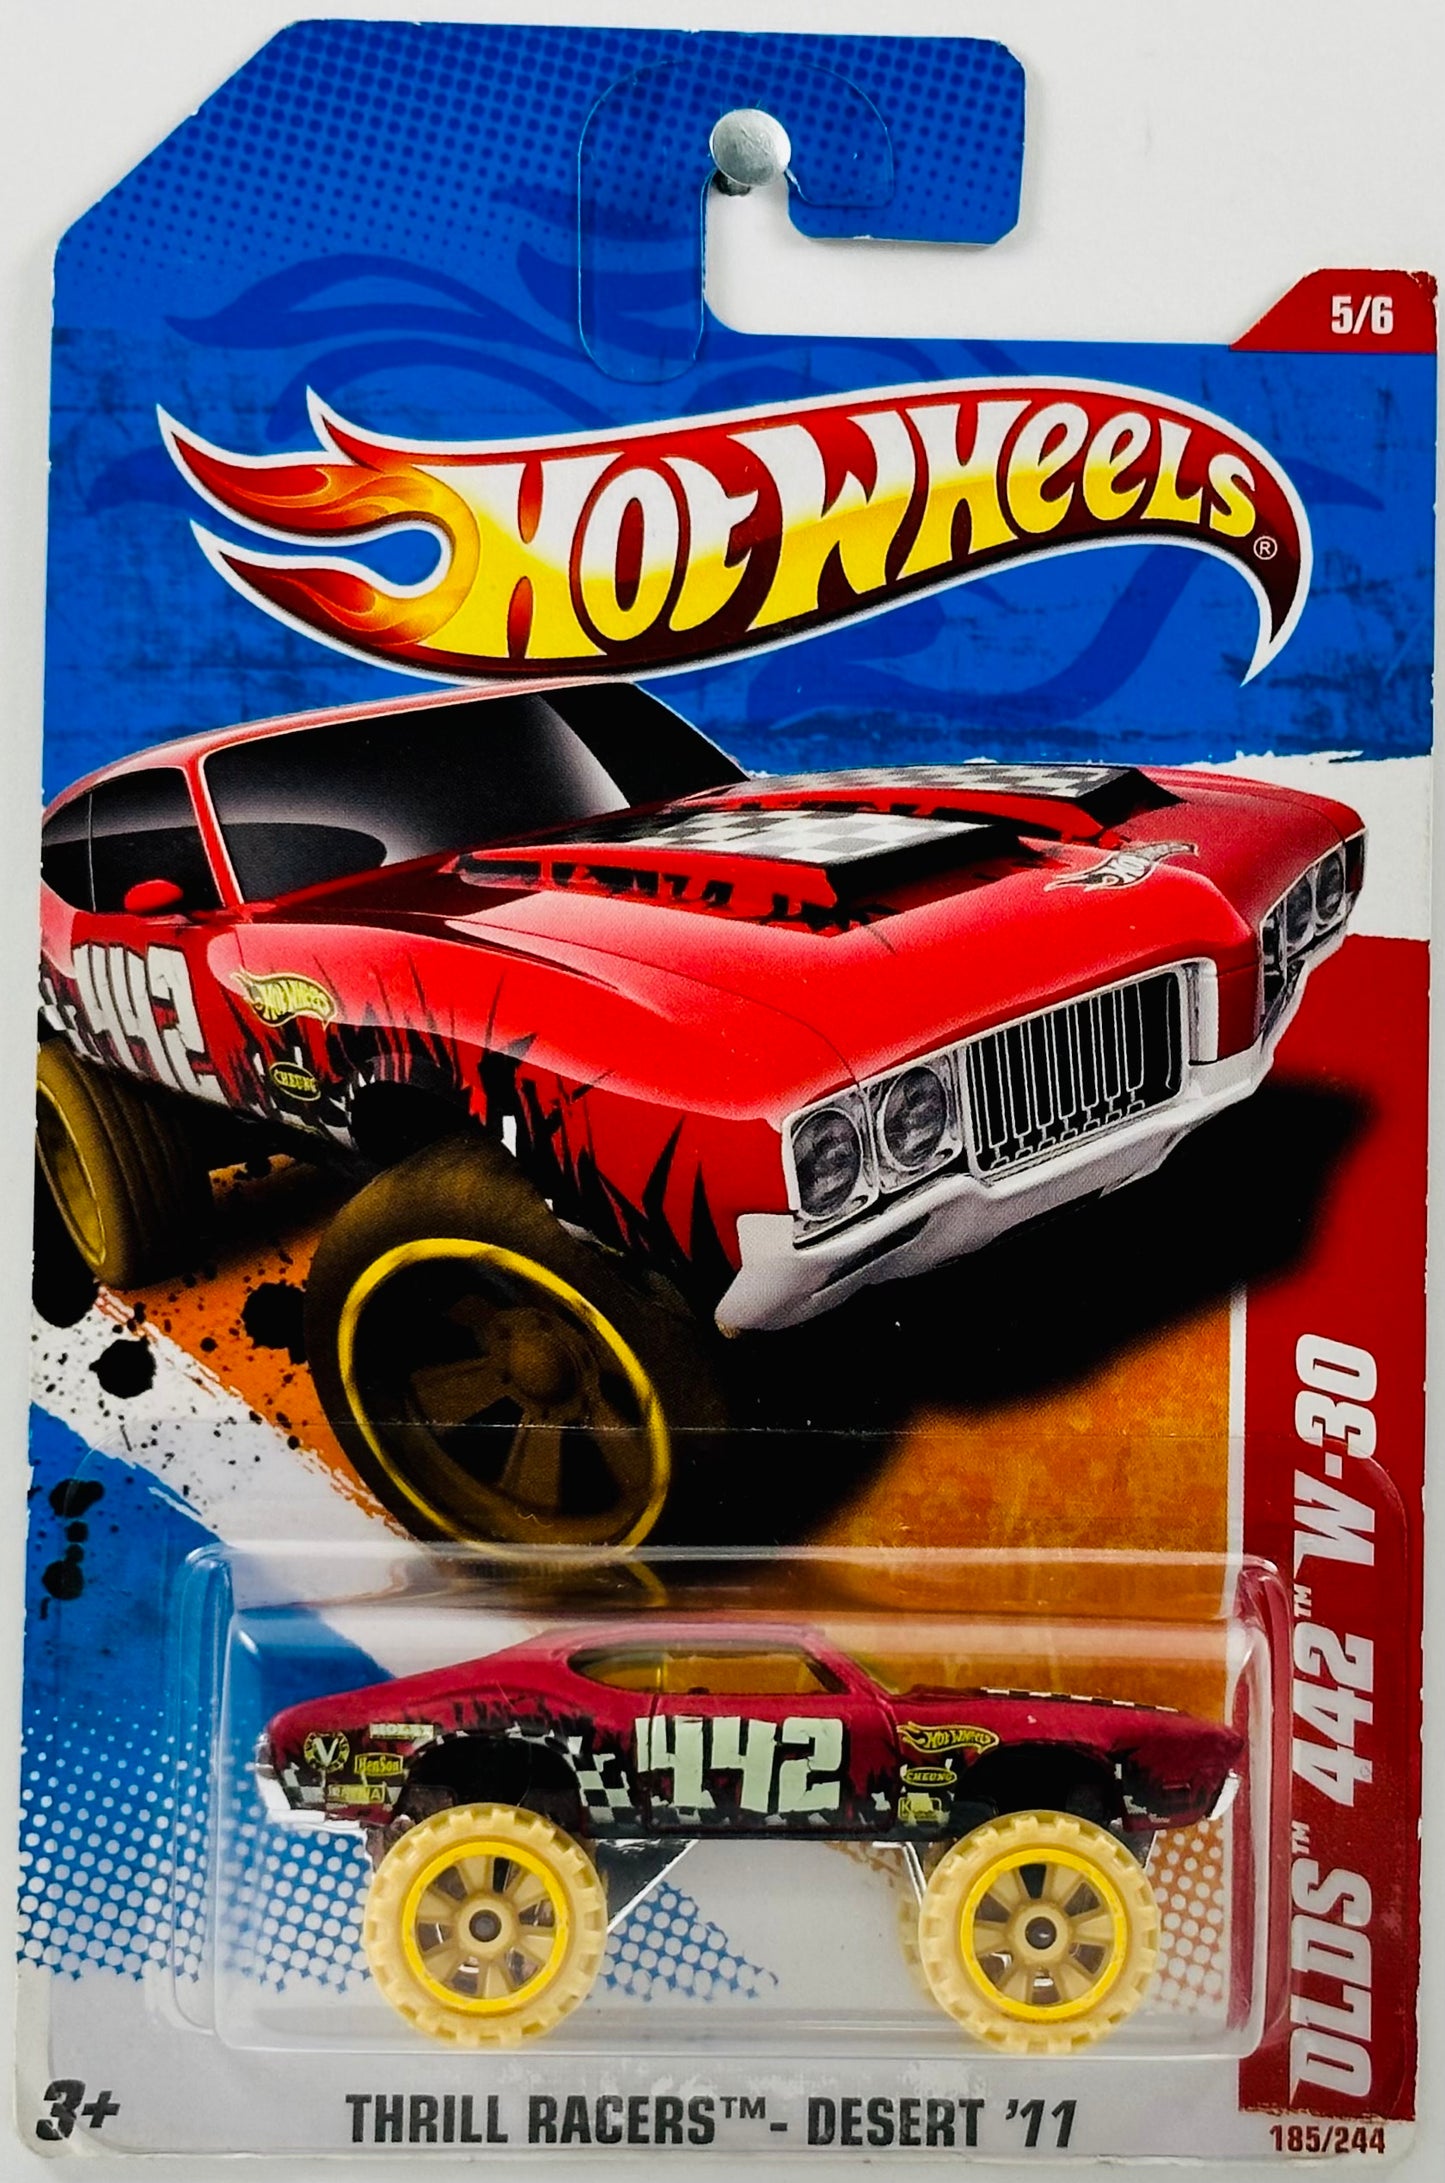 Hot Wheels 2011 - Collector # 185/244 - Thrill Racers: Desert 05/06 - Olds 442 W-30 - Satin Dark Red - USA